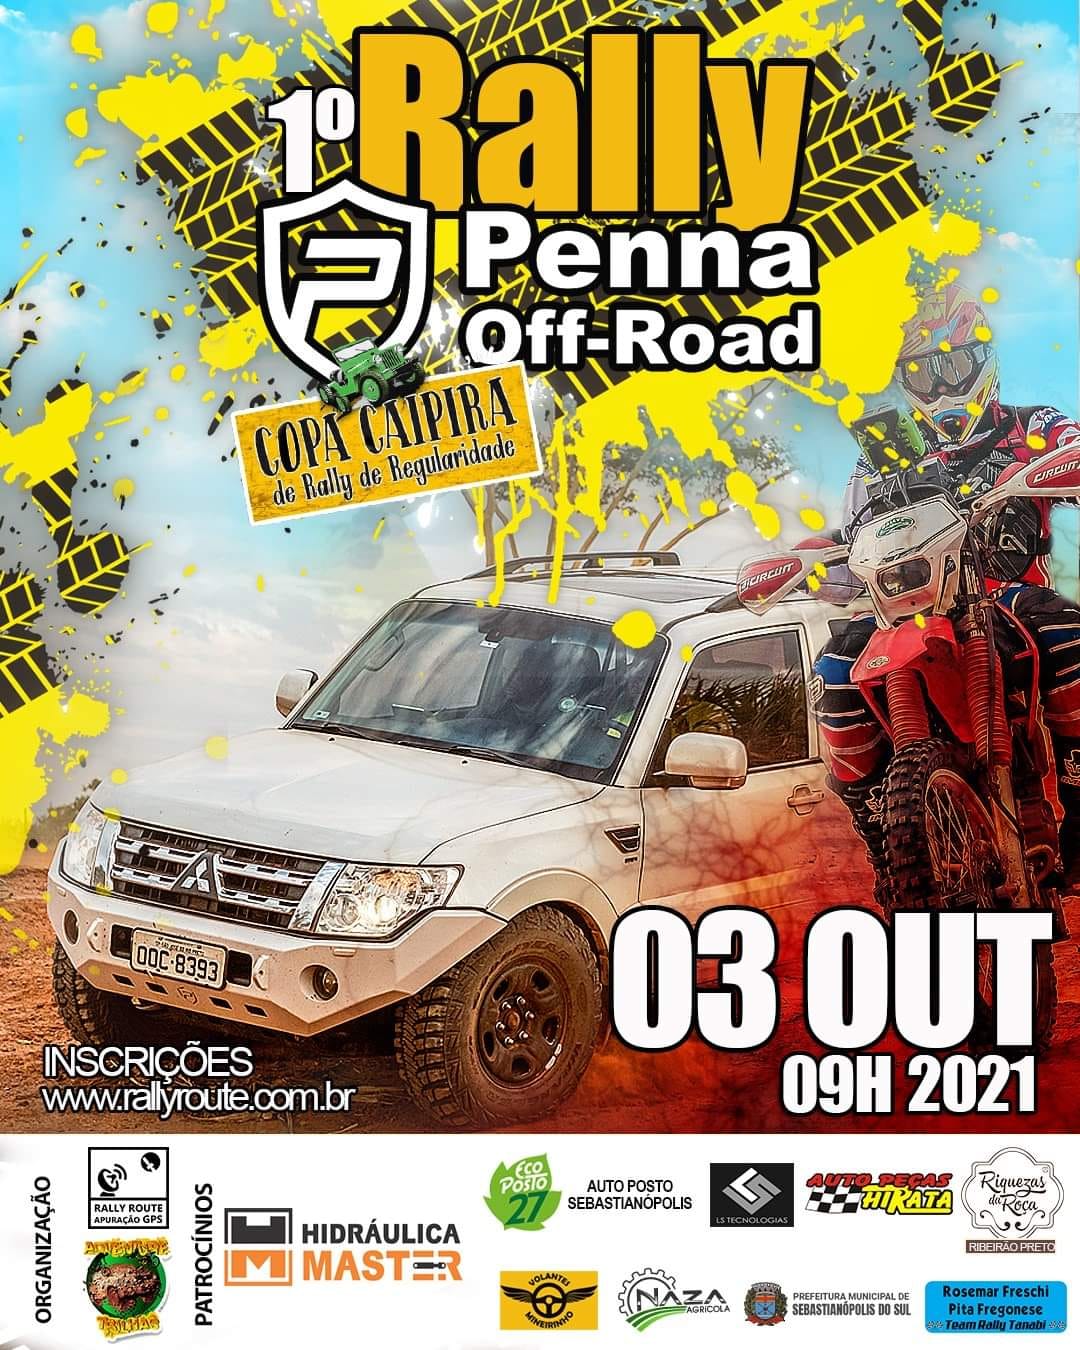 1° RALLY PENNA OFFROAD 2021